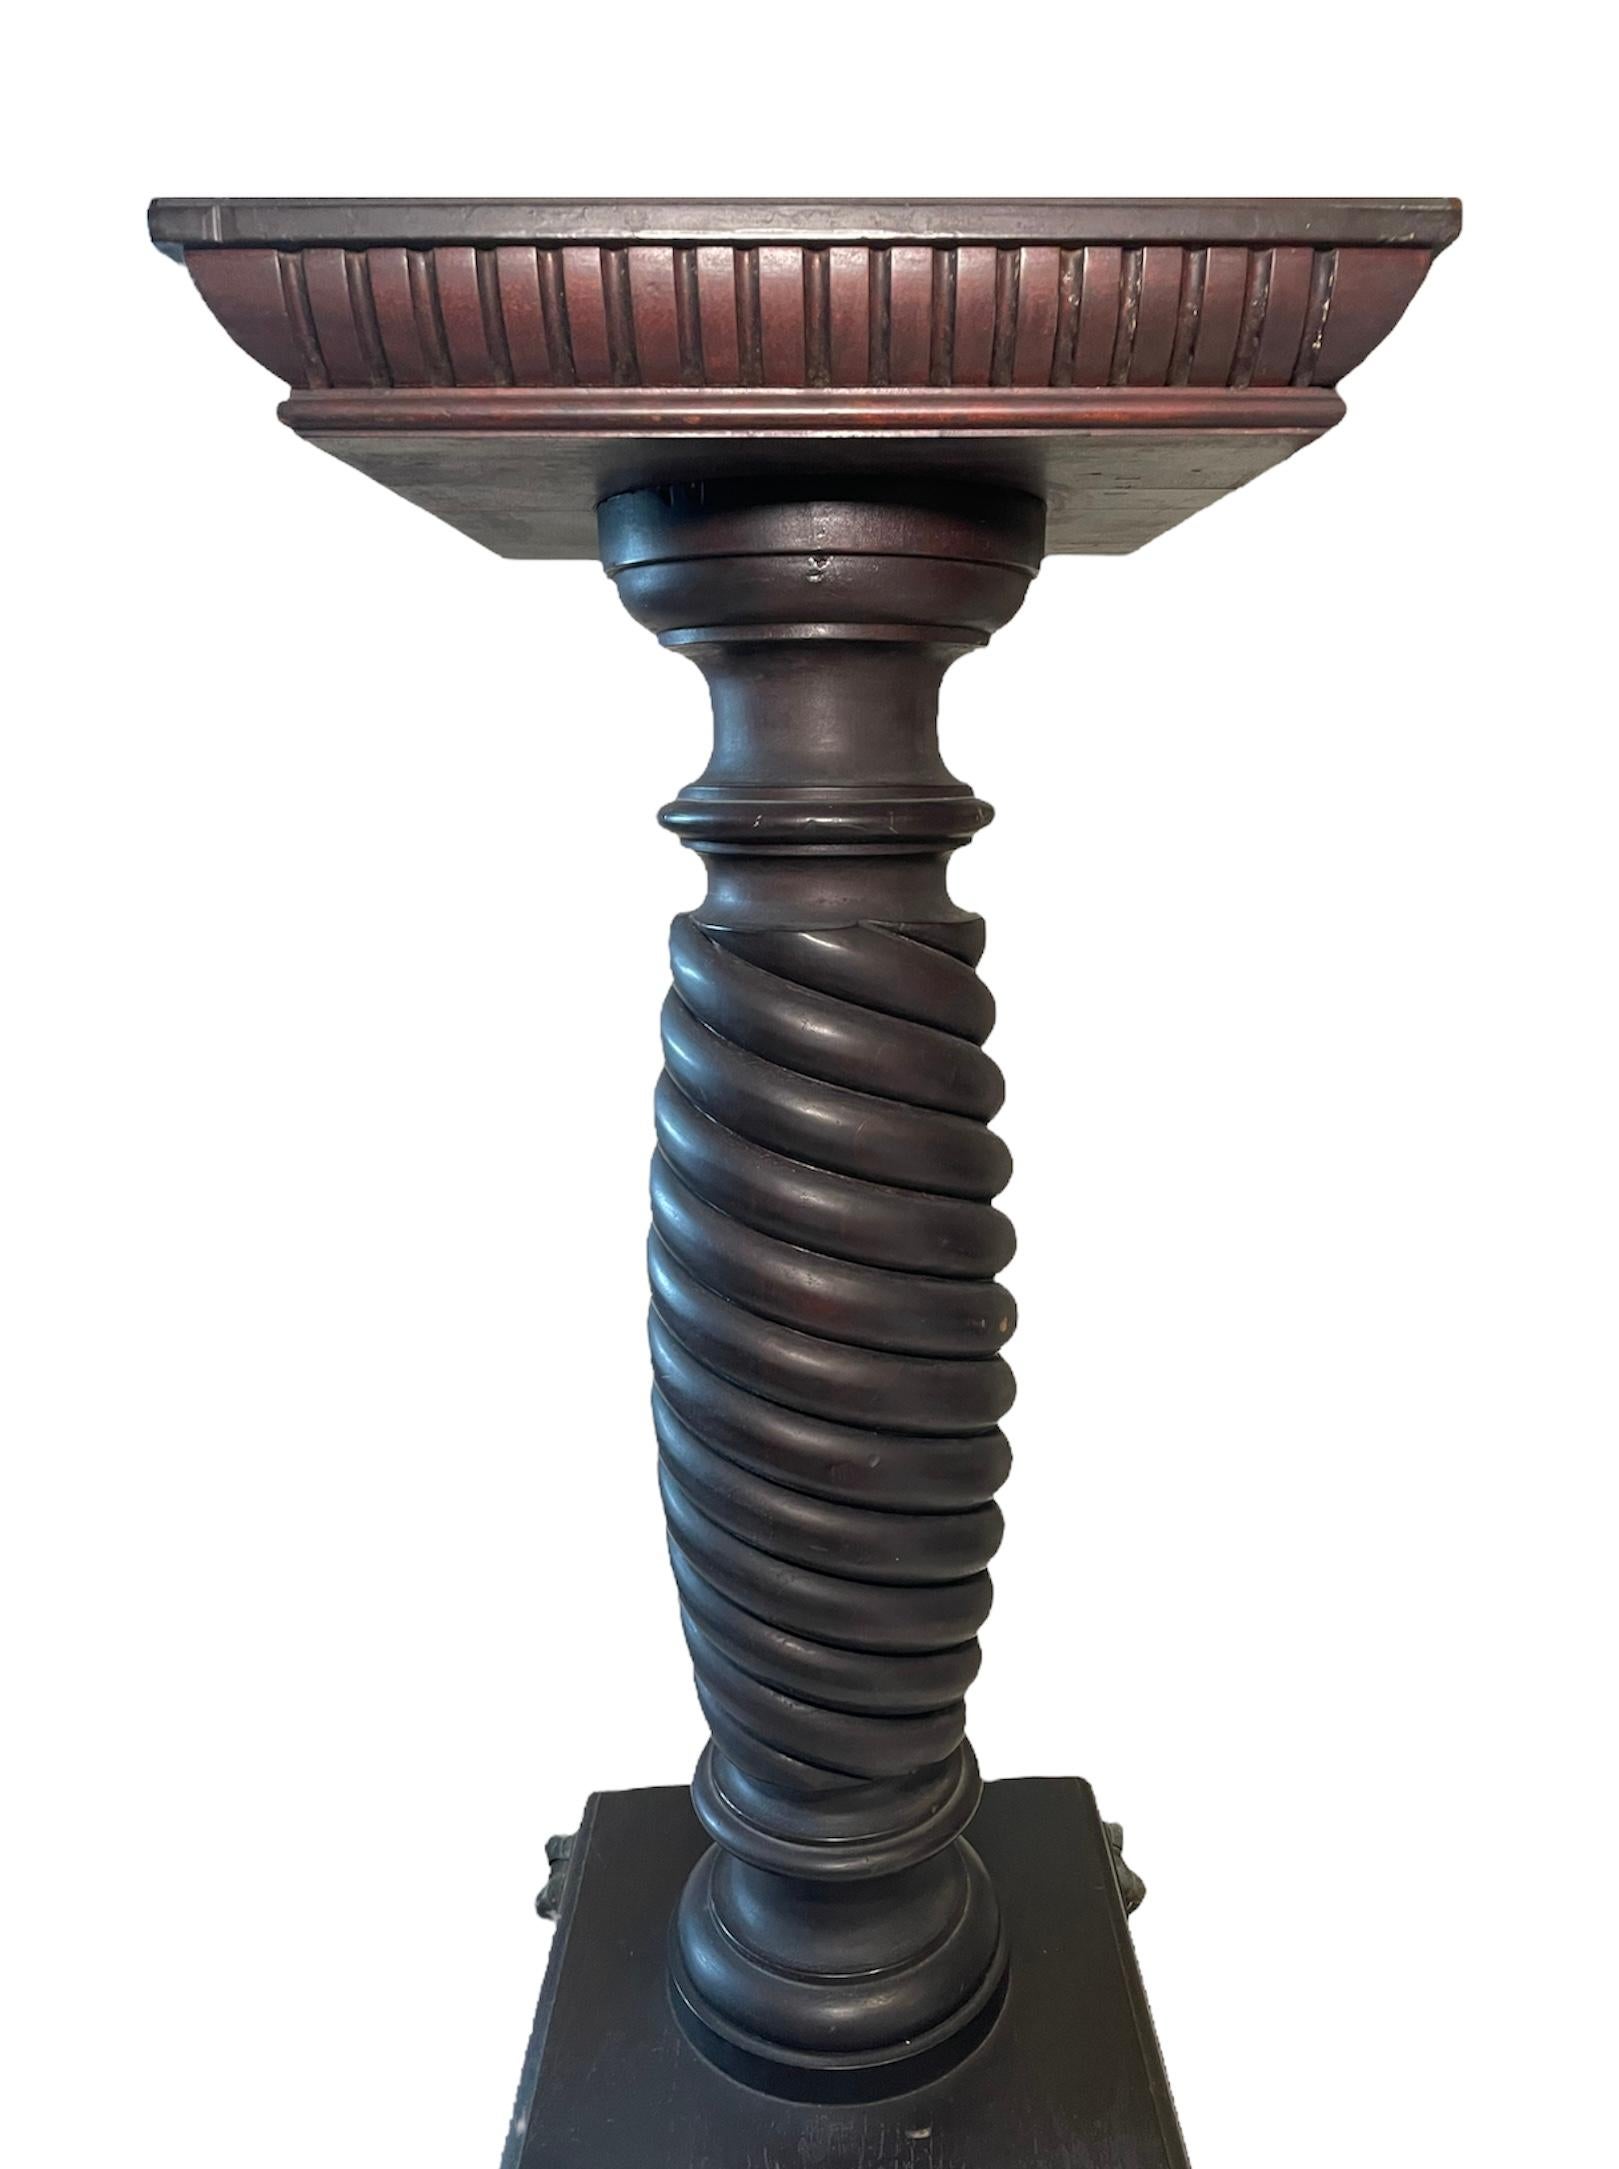 20th Century Neoclassical Style Carved Wood and Bronze Spiral Column / Pedestal For Sale